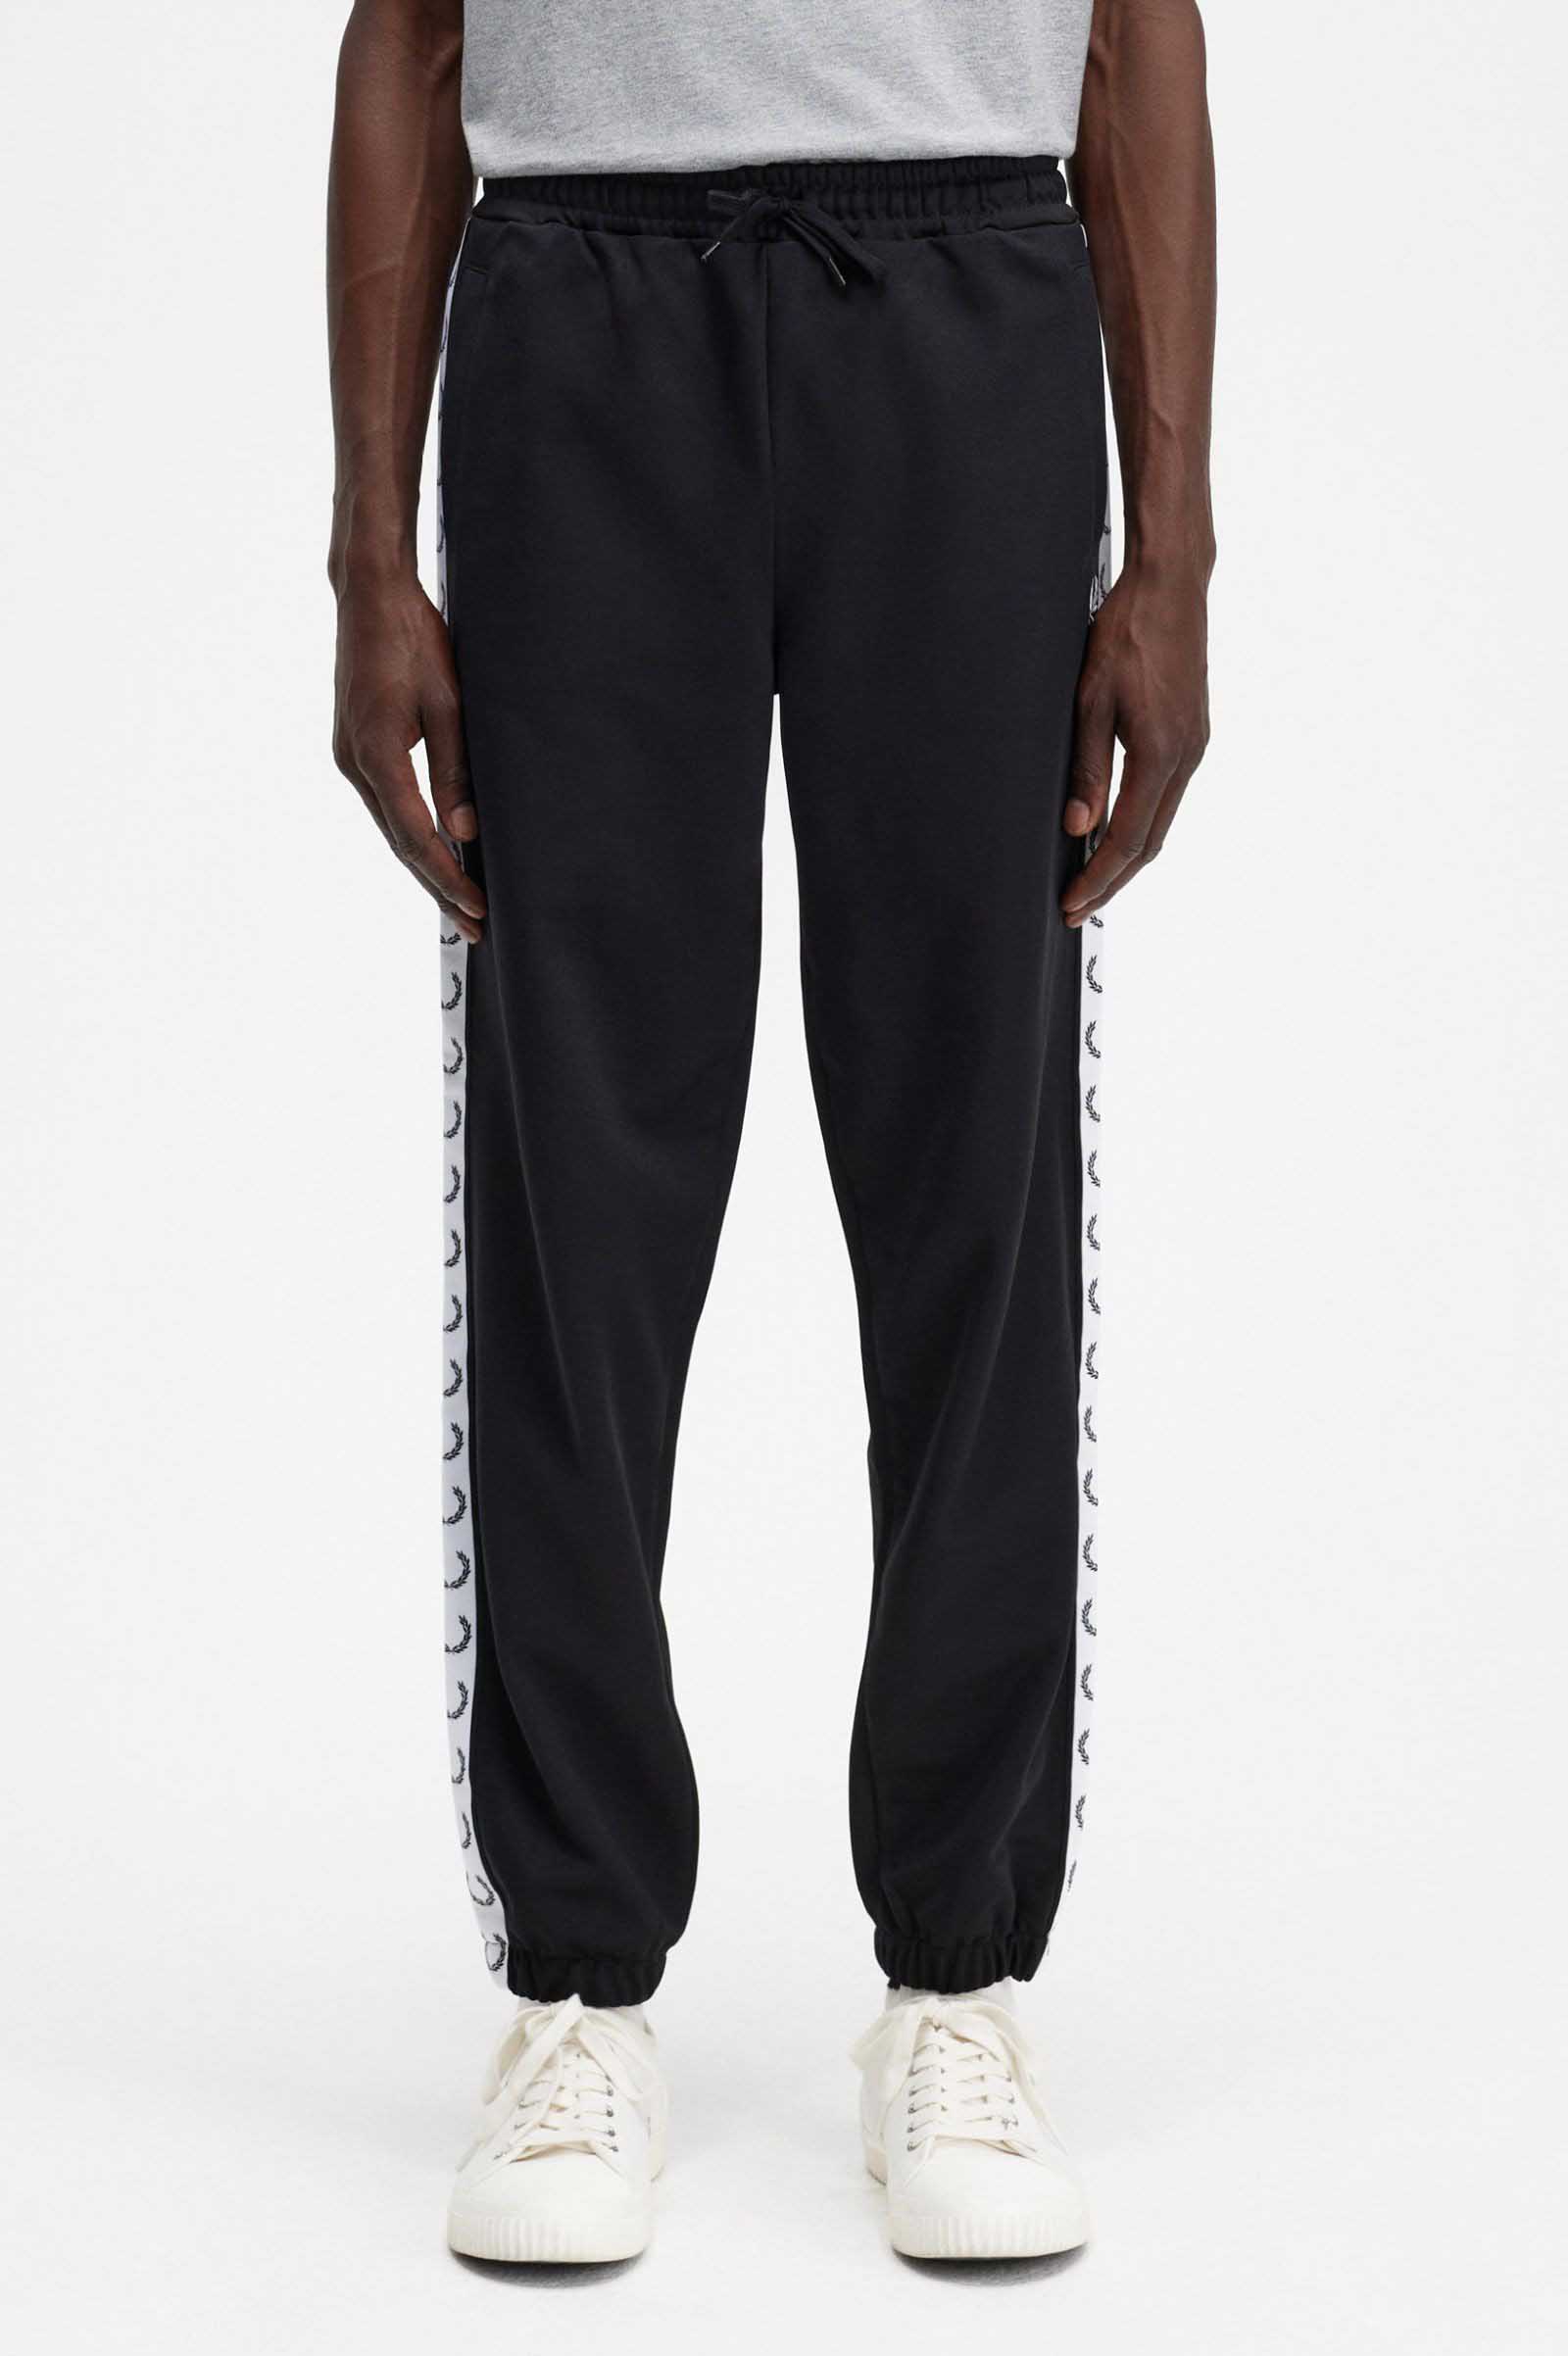 FRED PERRY SIDE TAPED TRACK PANTS【F4537】